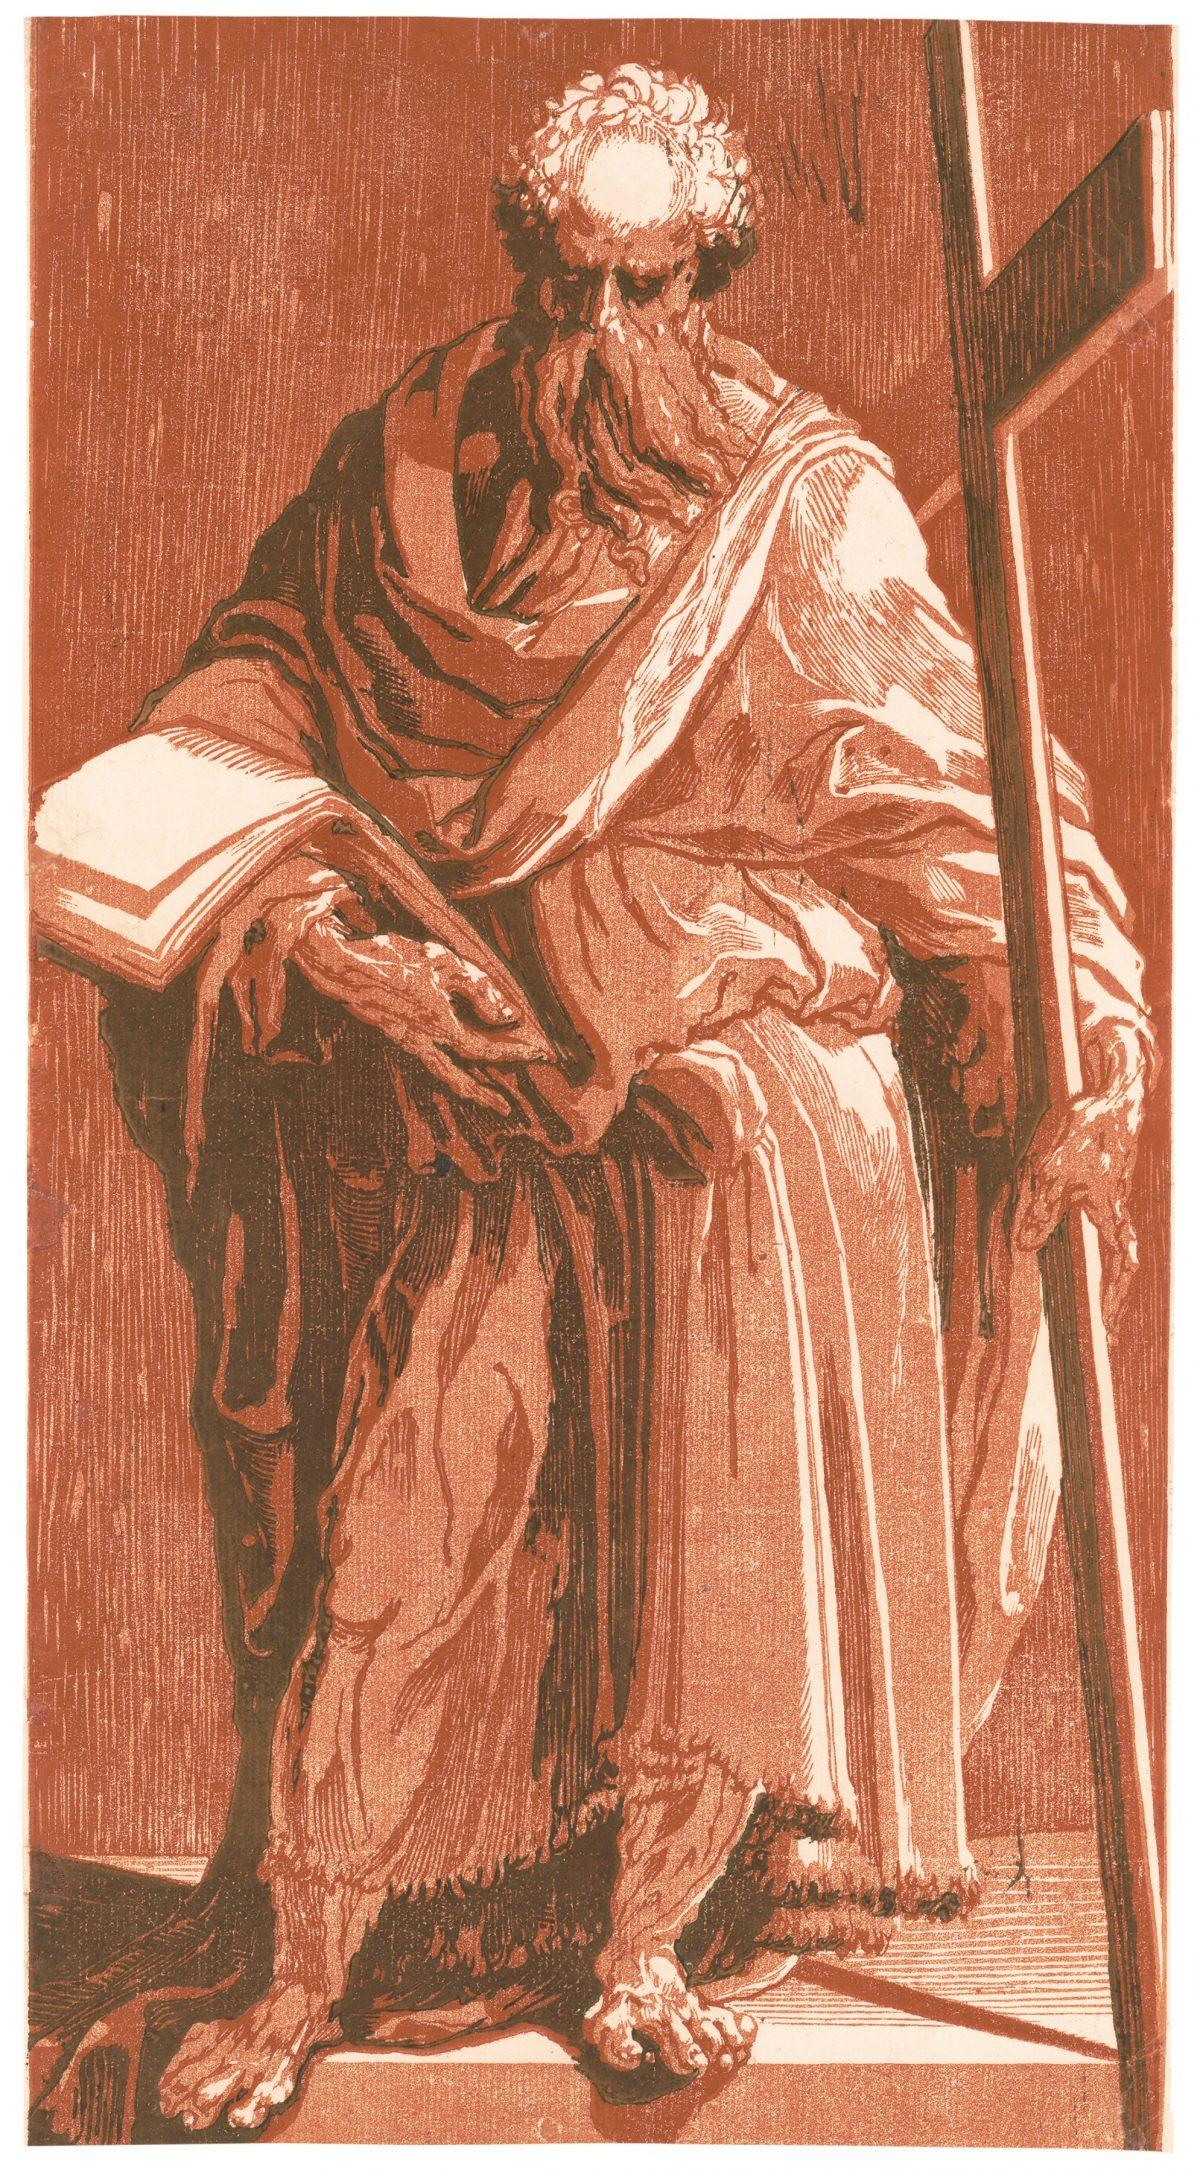 "Saint Philip," 1540s, by Domenico Beccafumi. Chiaroscuro woodcut from three blocks in light red, medium red, and black sheet, 15 5/8 inches by 8 1/2 inches. (Library of Congress, Prints and Photographs Division, Washington, D.C.)